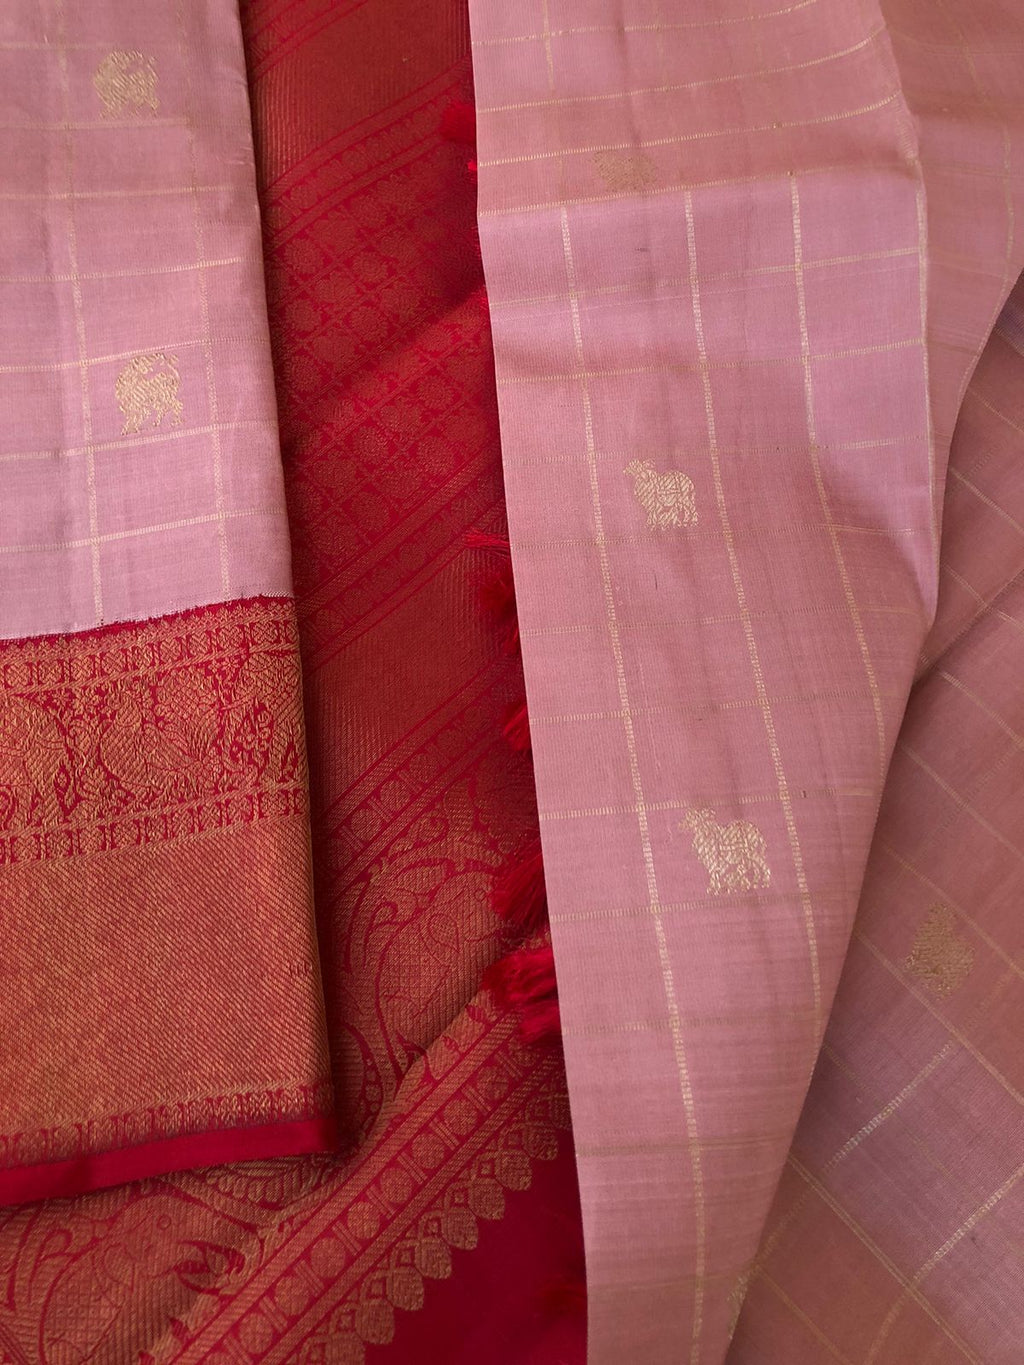 Swarnam - The Solid Kanchivarams - the rare pale dusky rose gold and red with matt finish borders and pallu